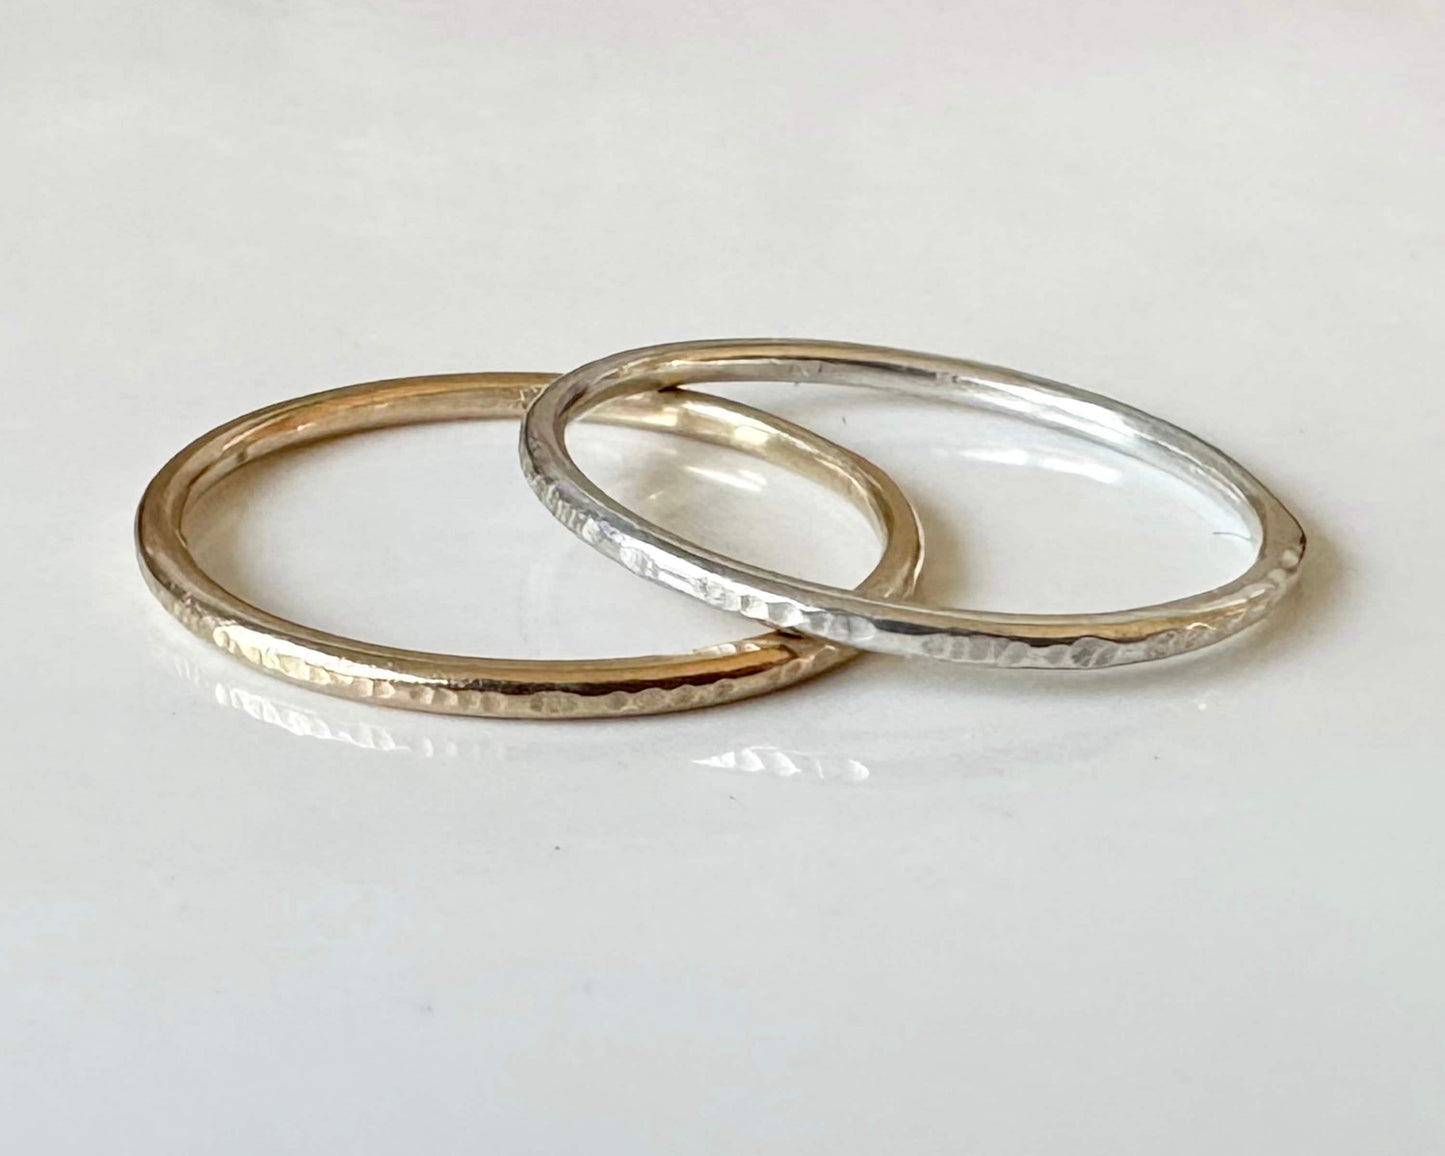 Skinny 1.2mm 9ct Gold Ring, Ripple Hammered Effect Minimalist Ring Band, Hadmade Gold Stackable Ring, Wedding Ring